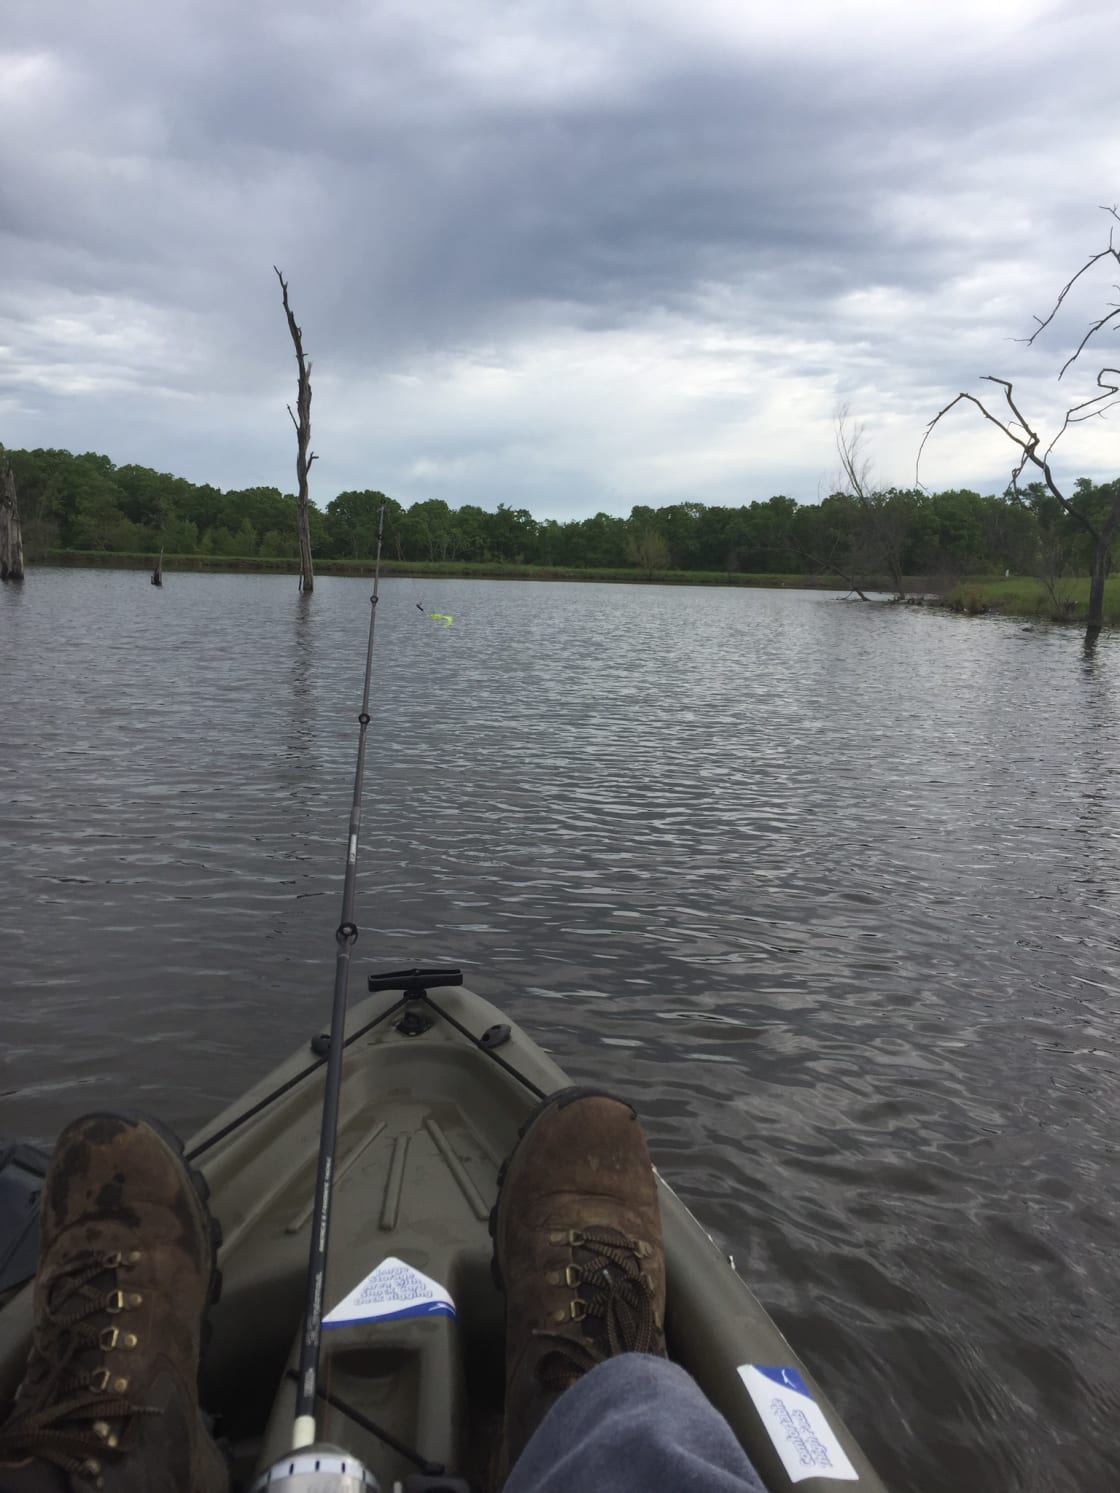 Kayak fishing is a great way to decompress